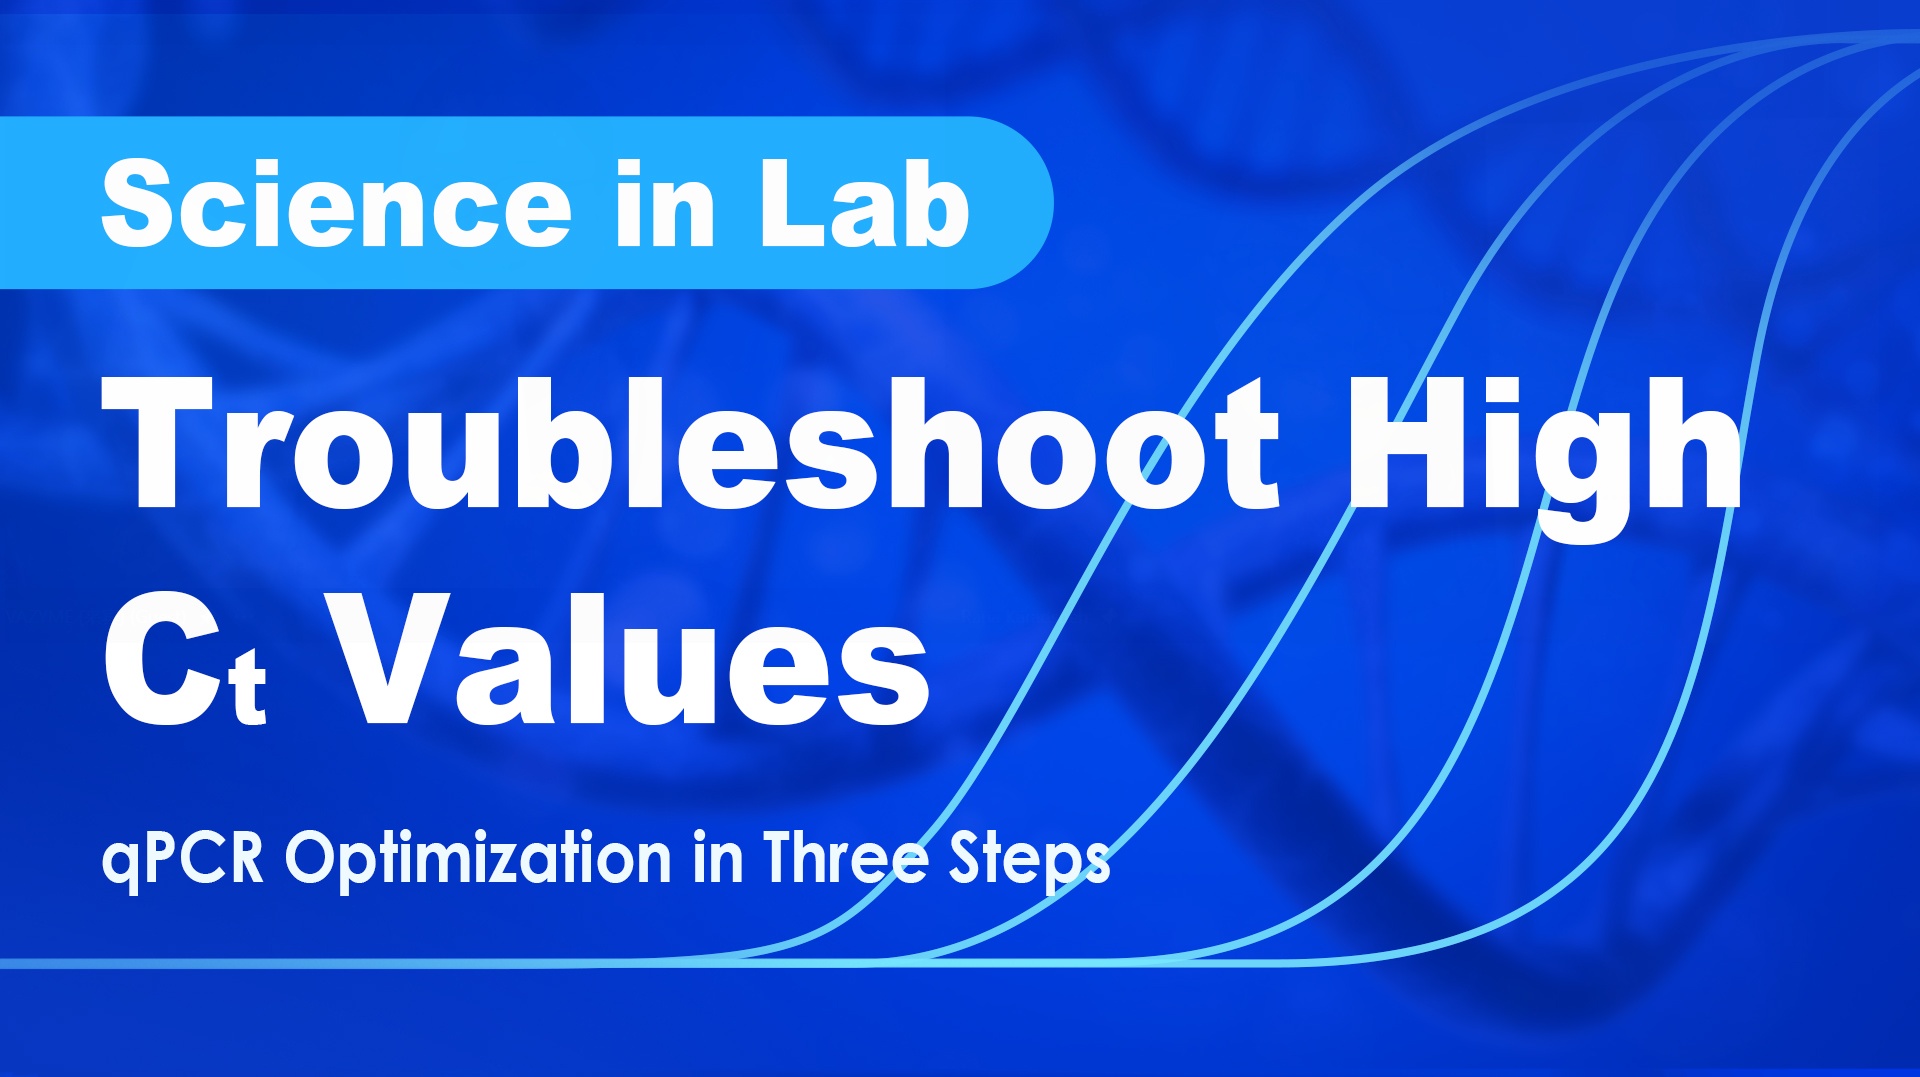 Science in Lab | Troubleshoot High Ct Values: qPCR Optimization in Three Steps